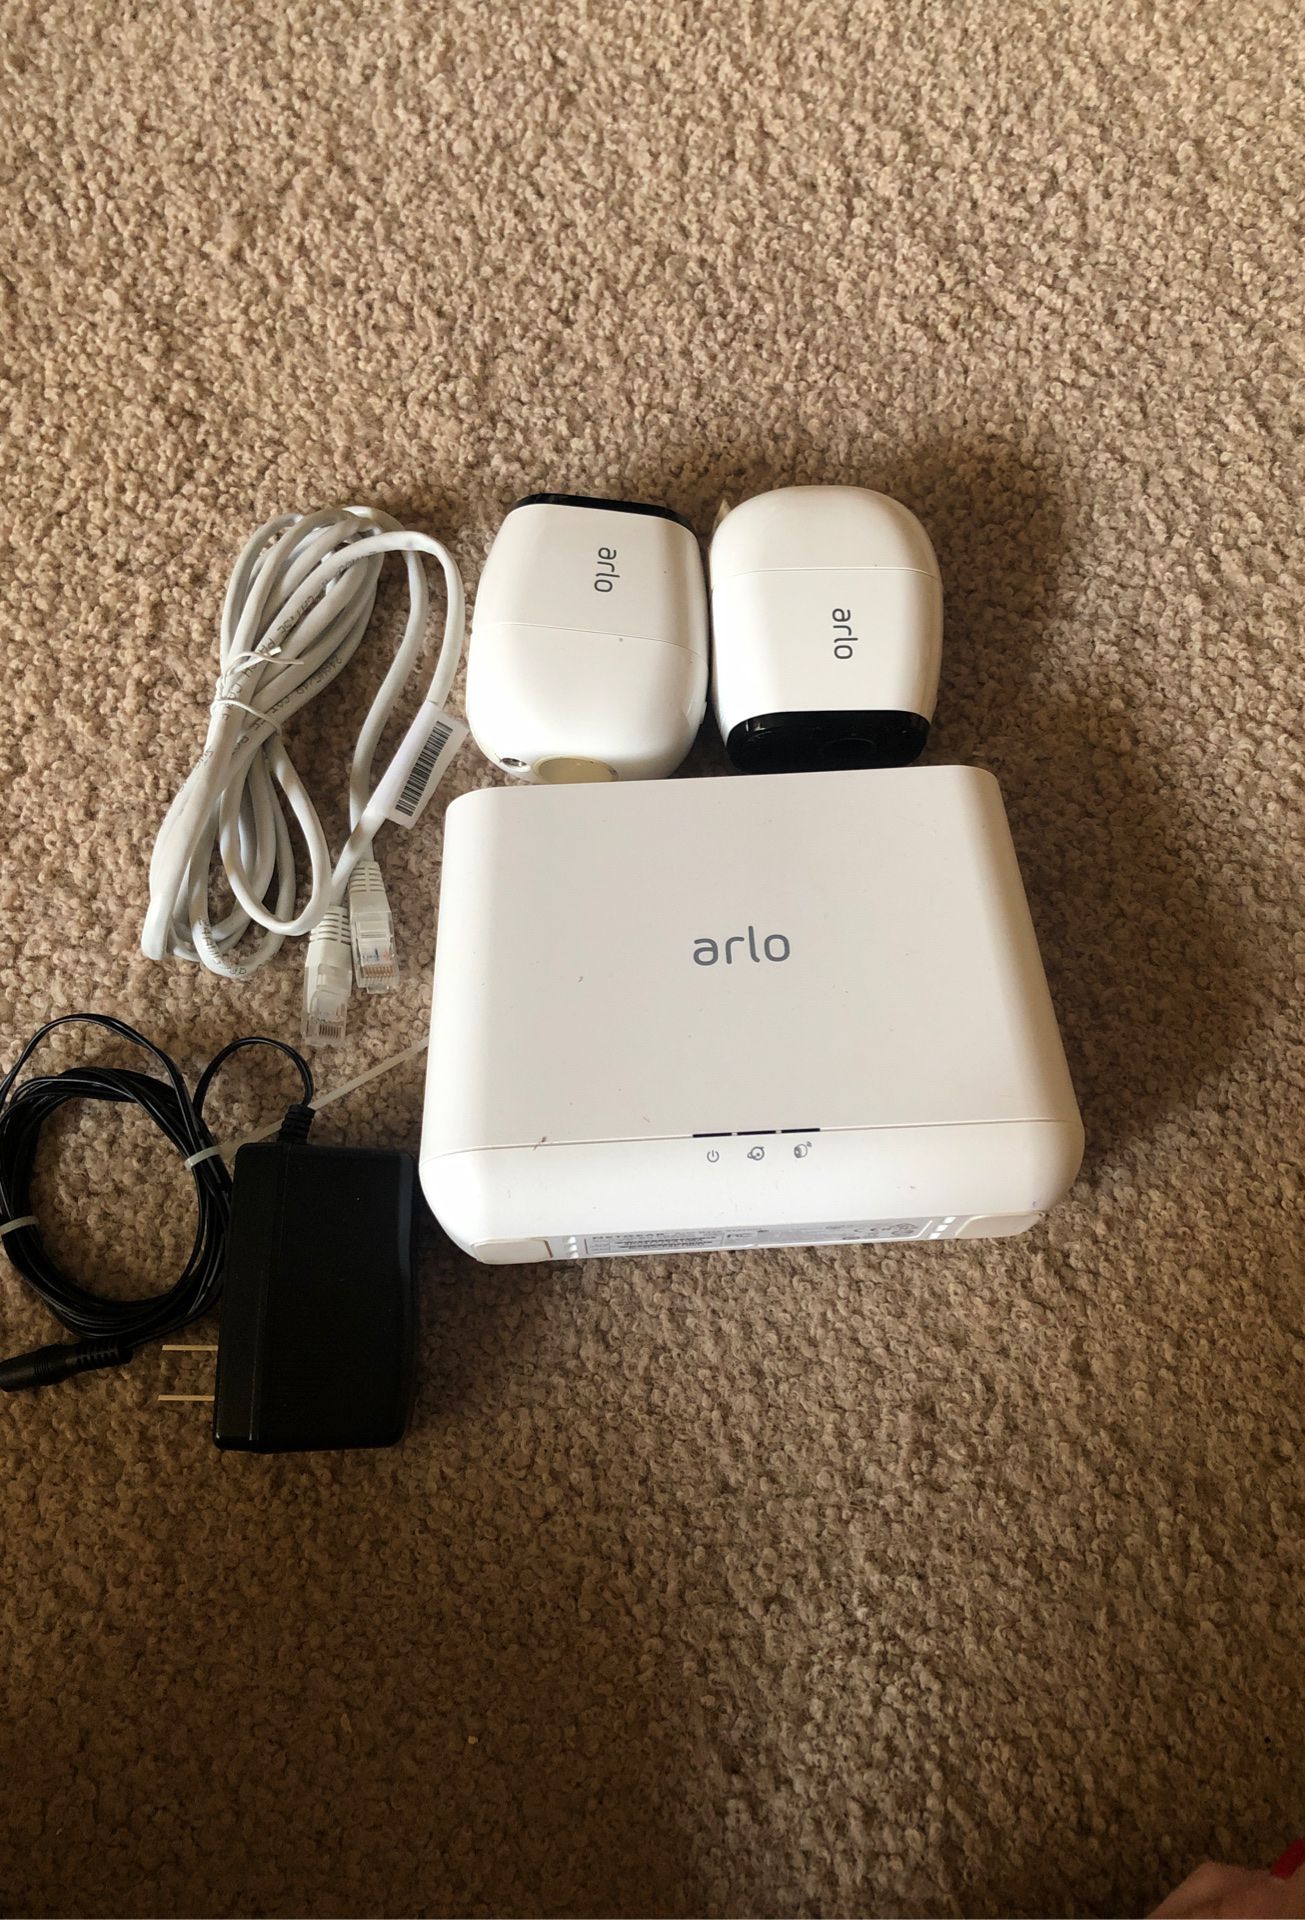 Arlo security system with 2 cameras